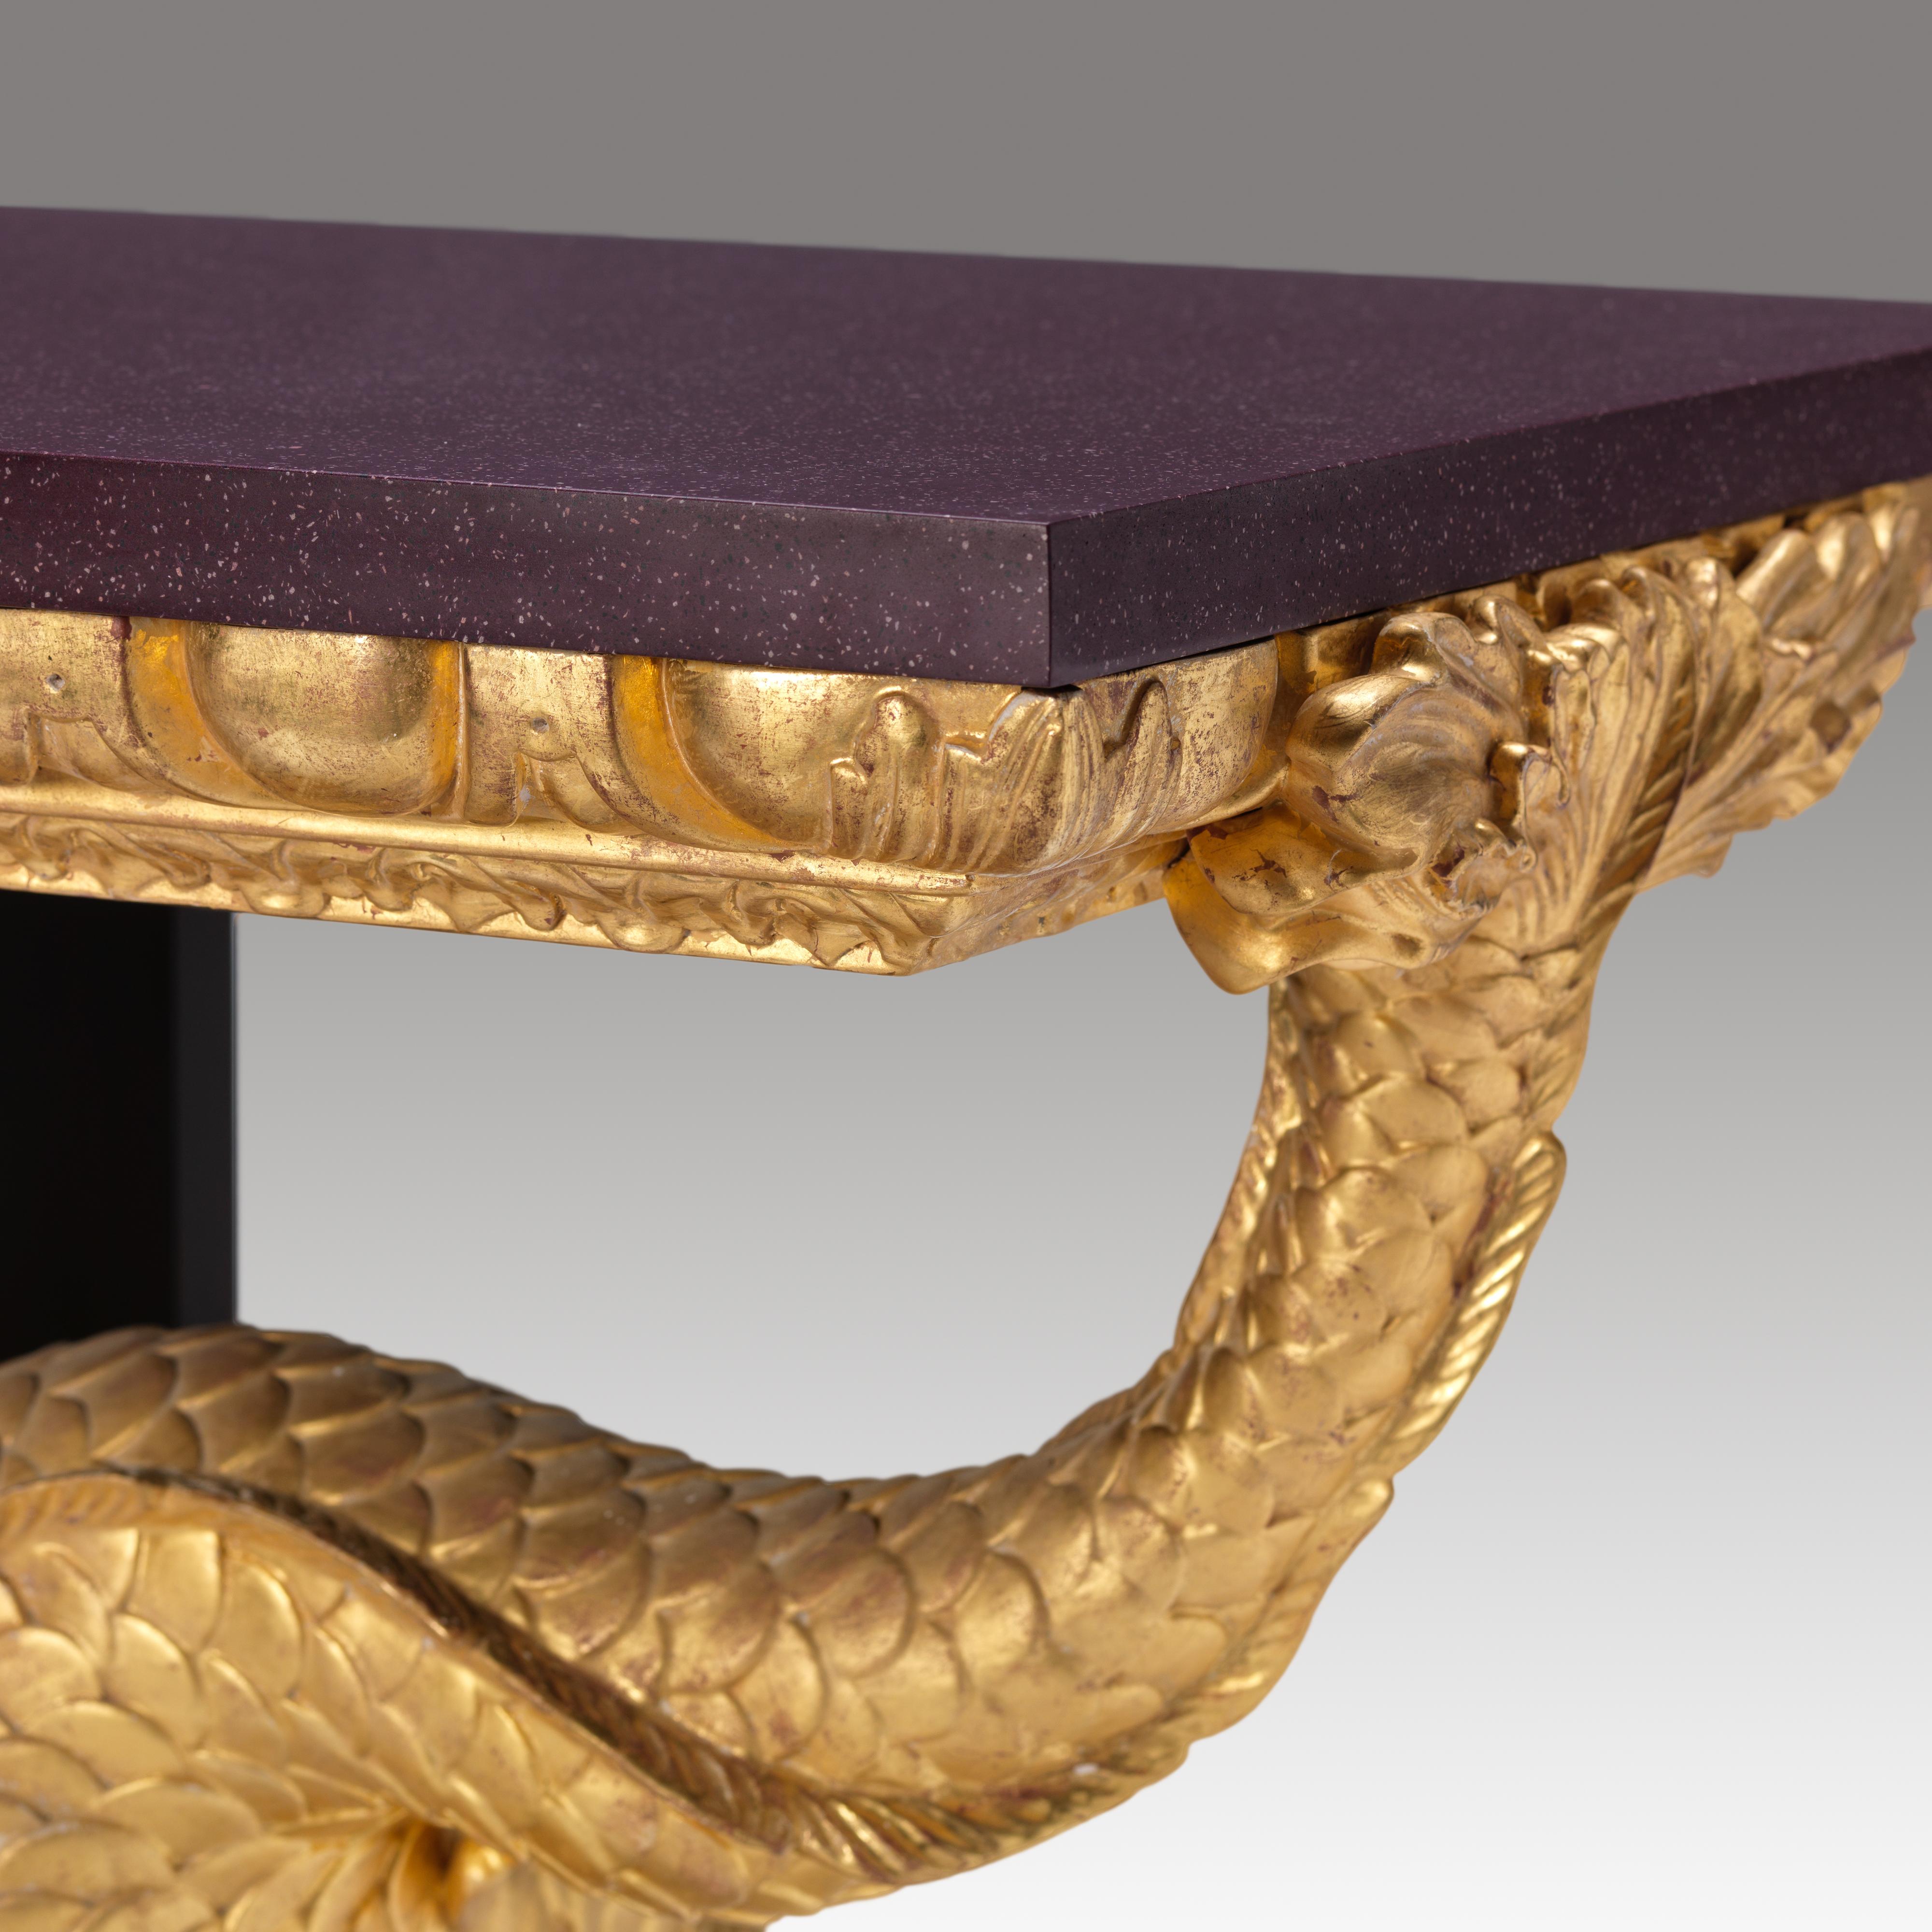 A fine William Kent dolphin pier console table with scagliola porphyry top. Resting upon an egg-and-dart frieze supported by a trio of stylised Kentian dolphins upon a faux porphyry carved step work plinth.

Bespoke sizing, design adaptations and